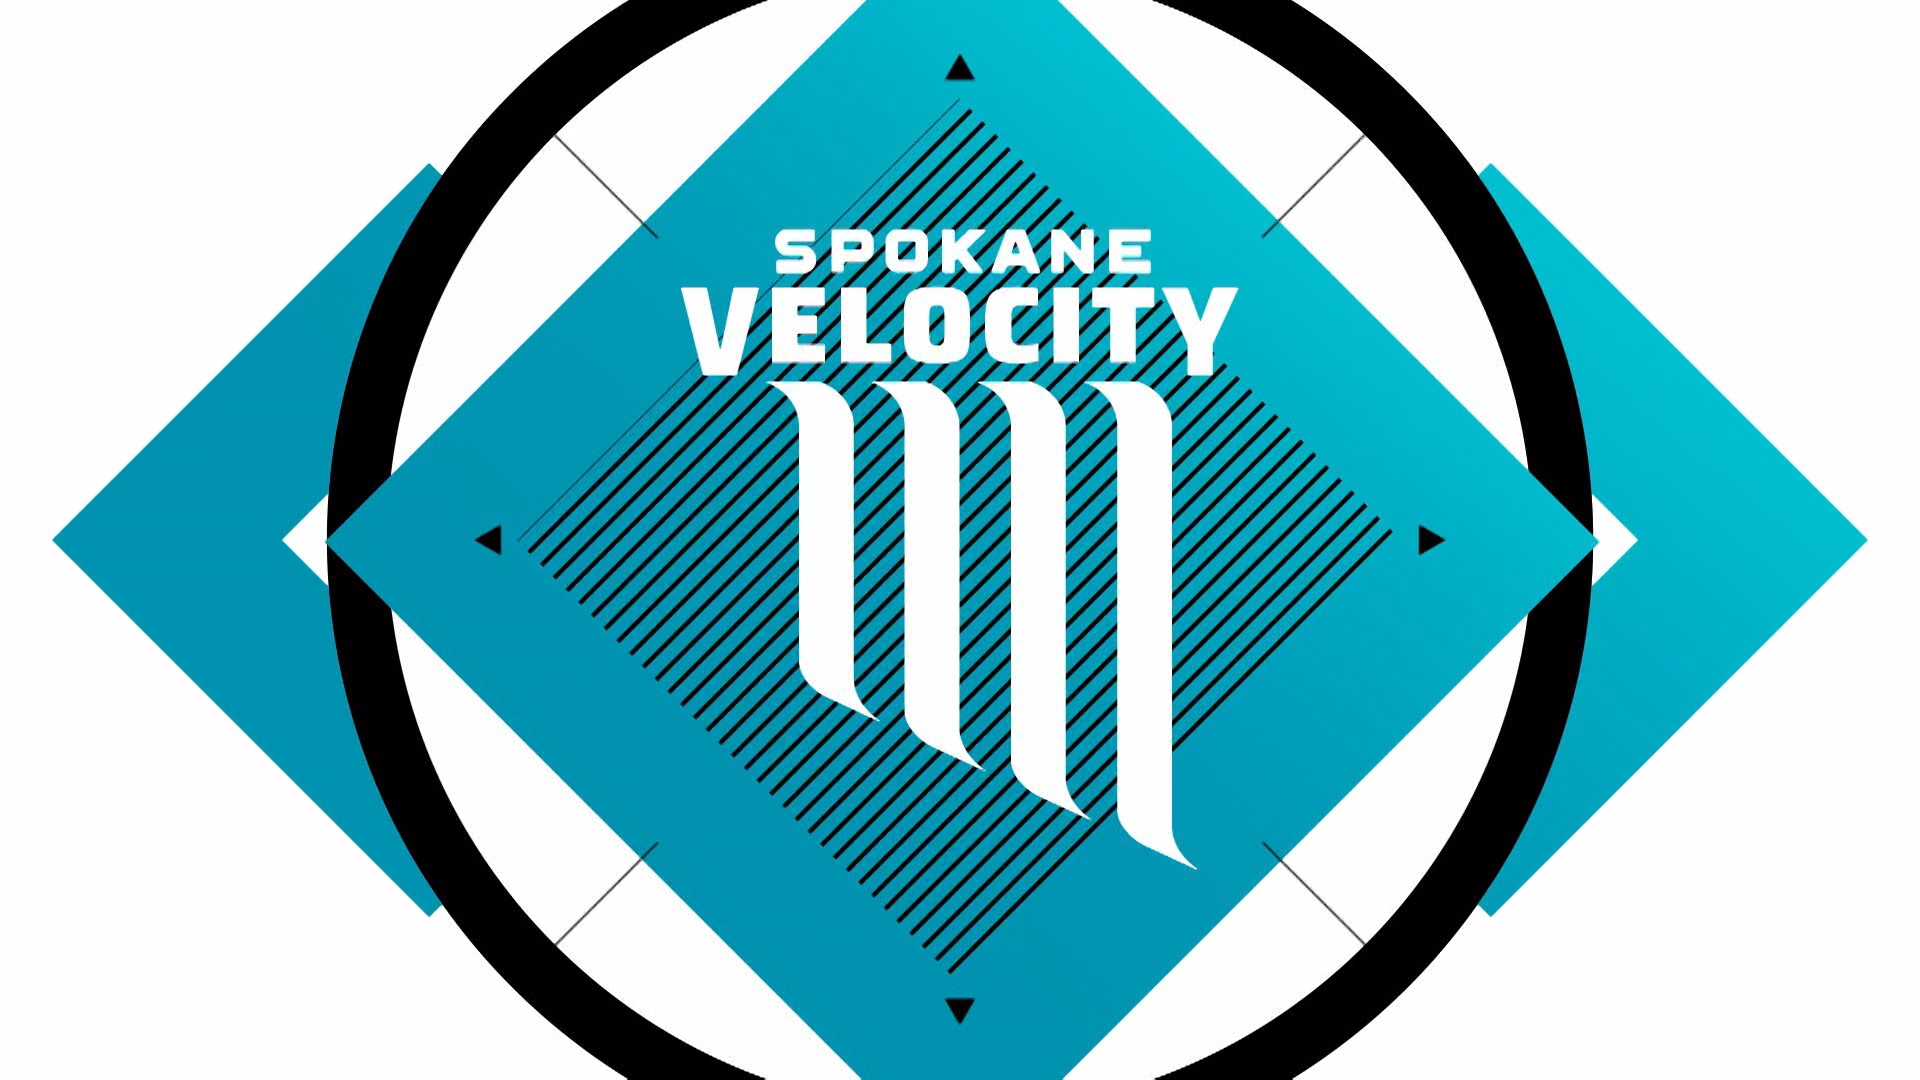 Follow us on the pitch and go behind the scenes as KREM 2 introduces you to Spokane Velocity FC, the city's new professional soccer team.